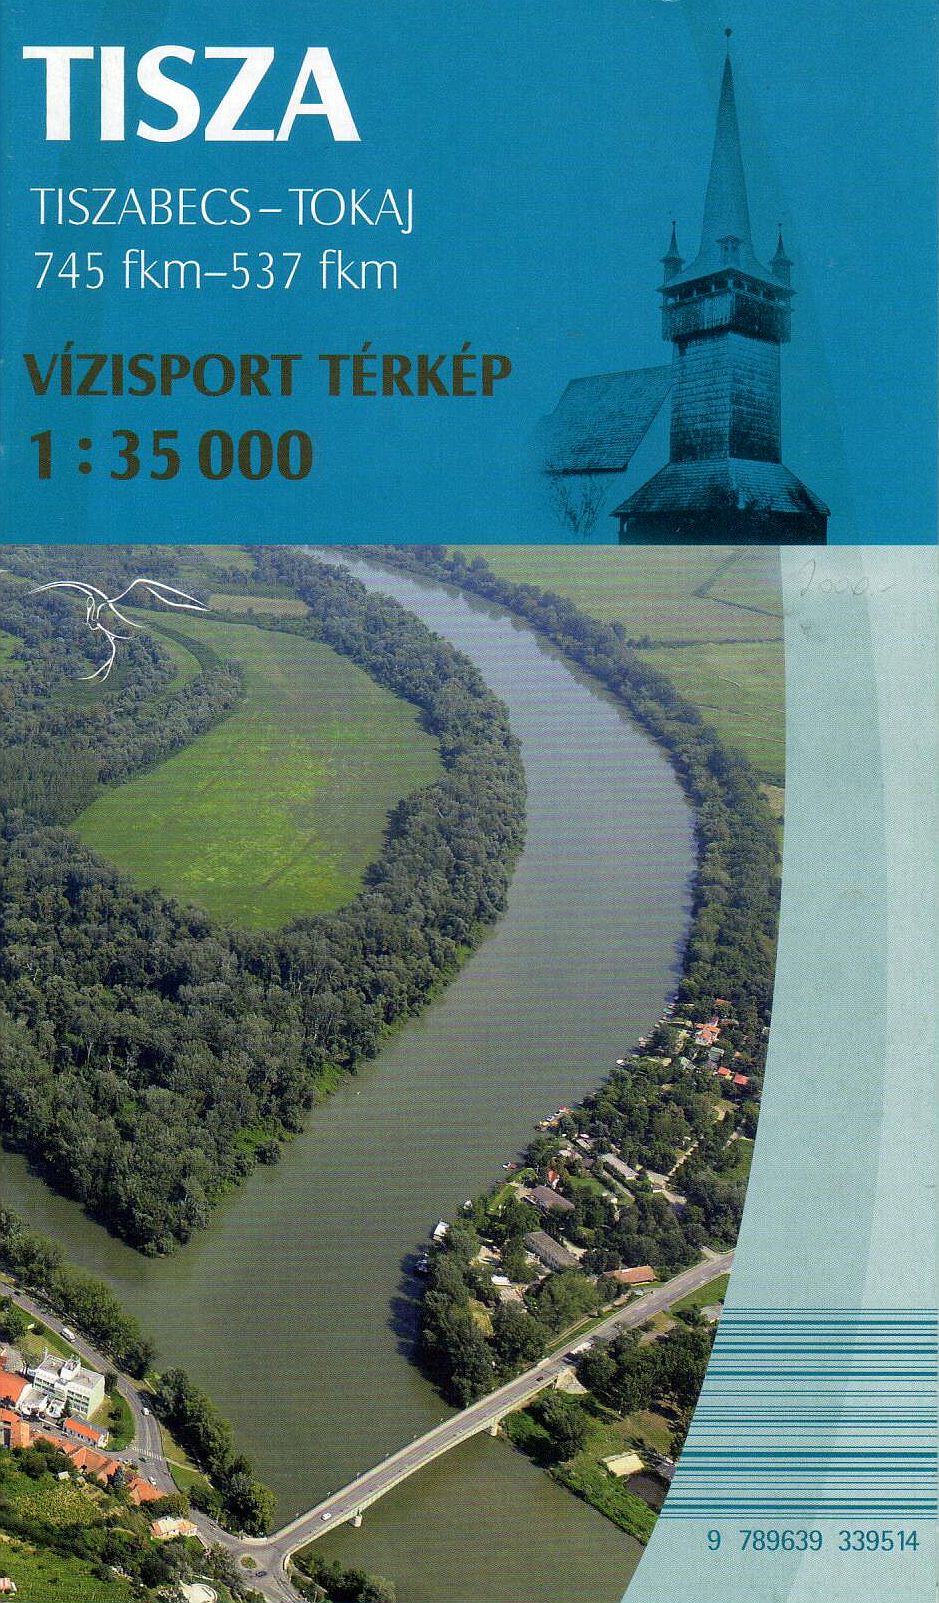 Deatailed kanoing and angling map of the Tisza river  (745-537 km section) from Ukrainian boundary till Tokaj